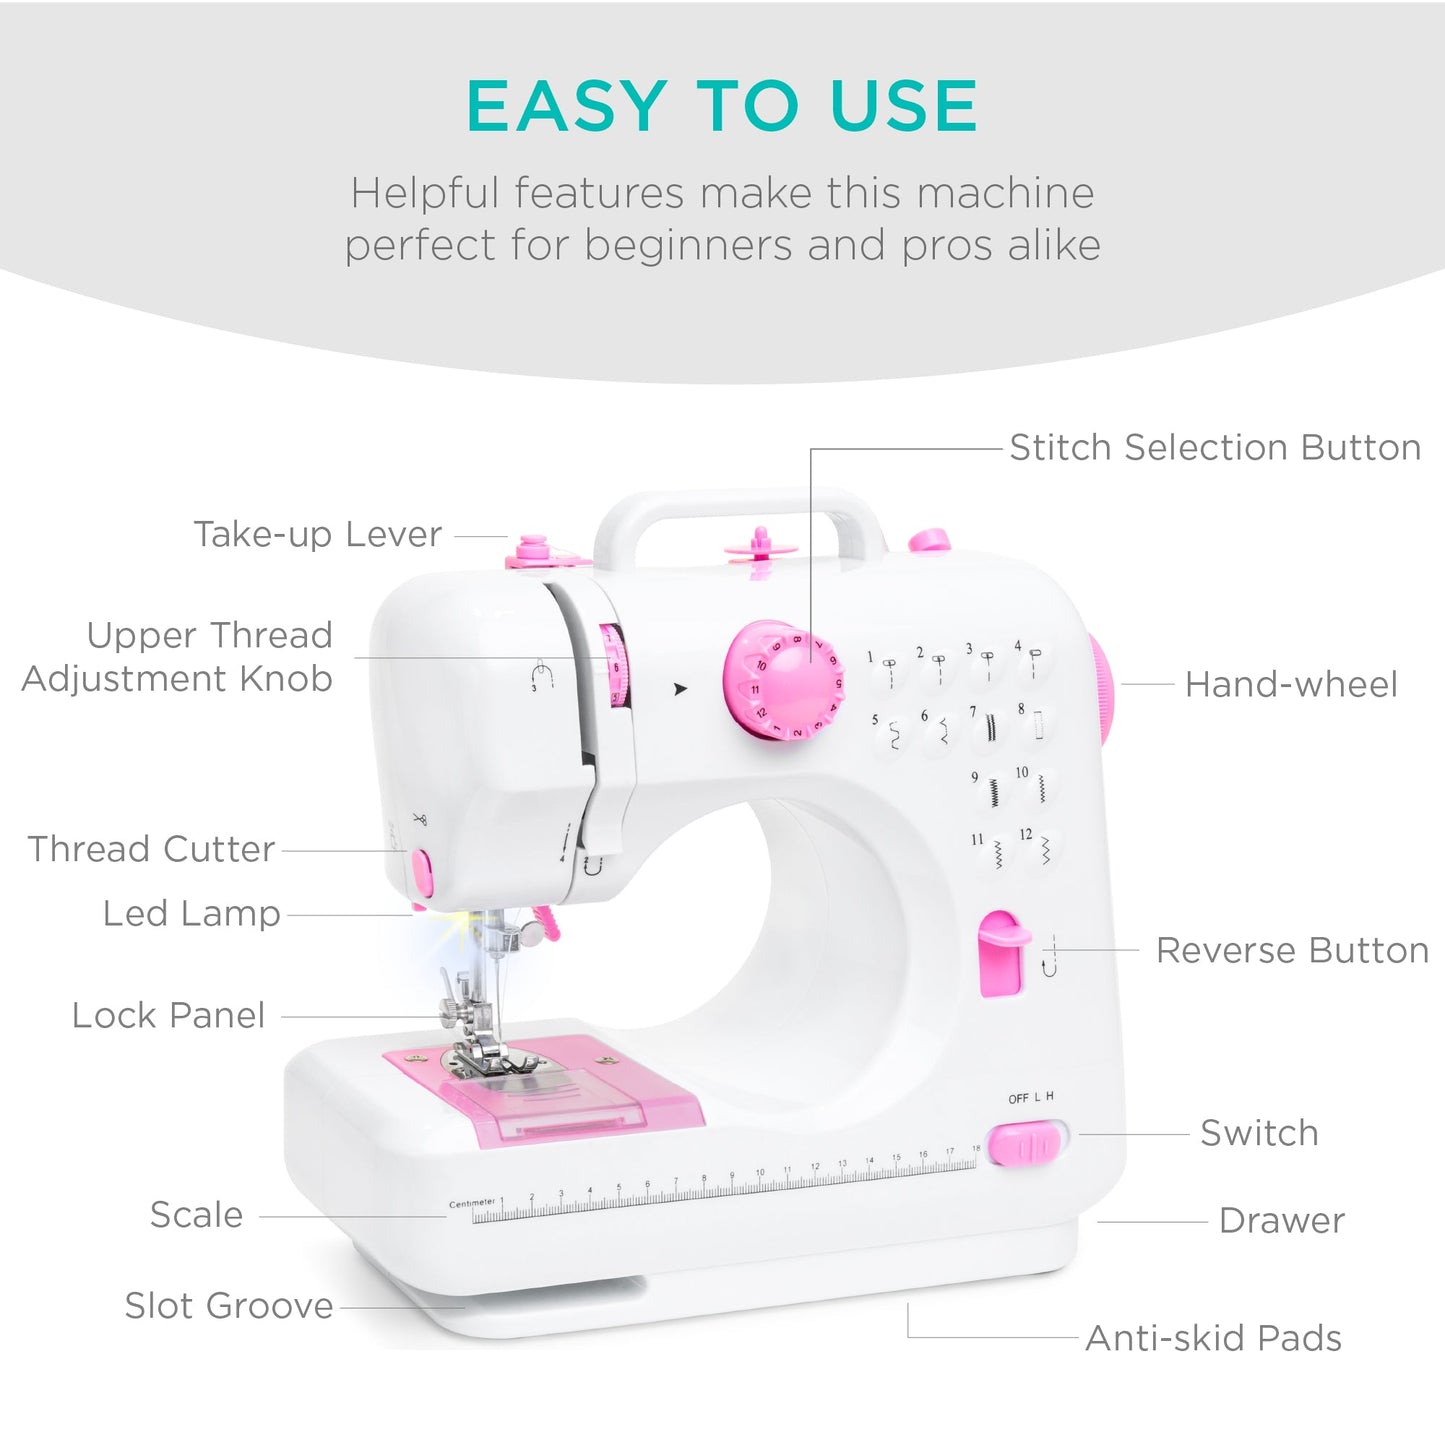 6V Portable Foot Pedal Sewing Machine w/ 12 Stitch Patterns